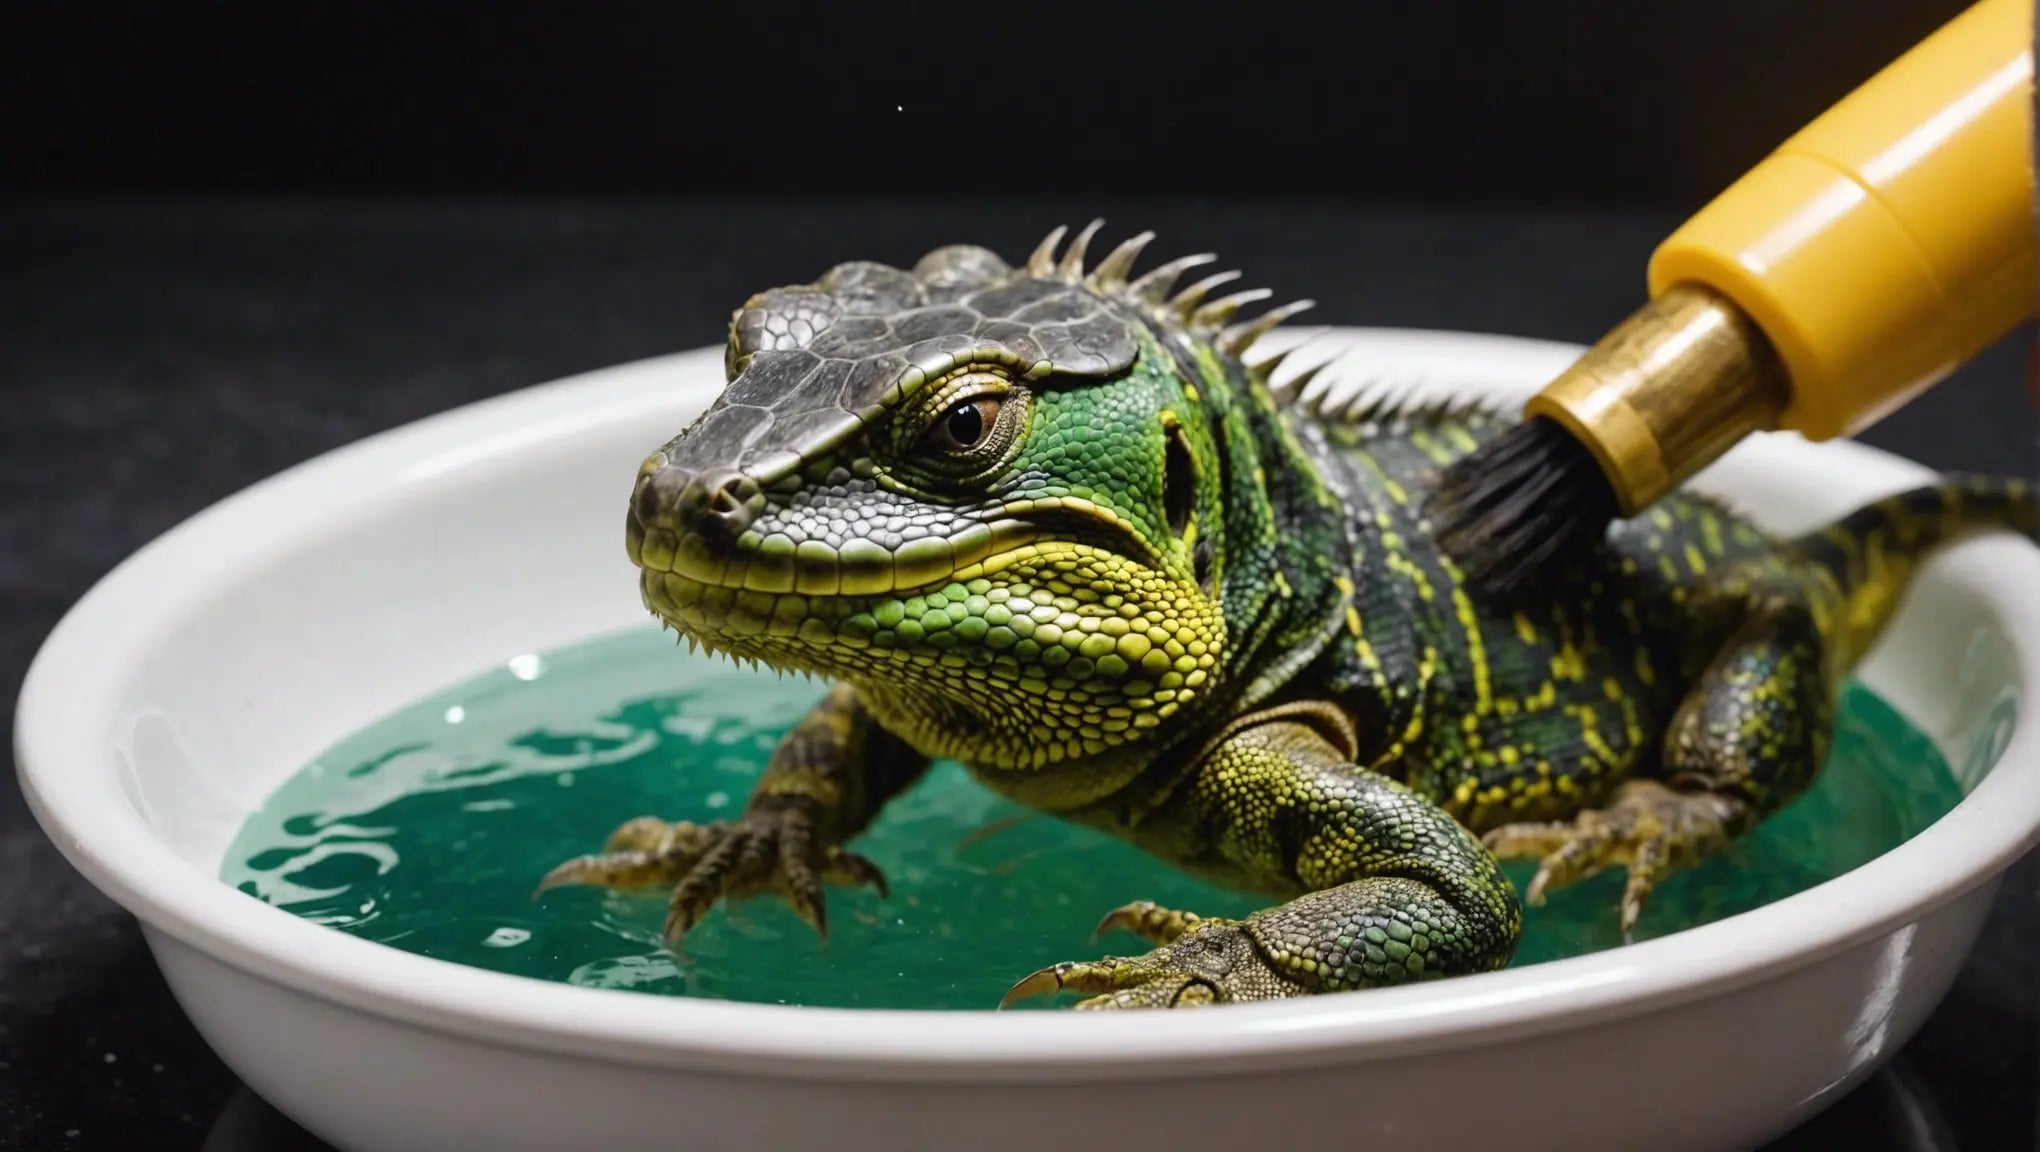 Top Pet Grooming Products for Keeping Your Reptile Clean and Healthy